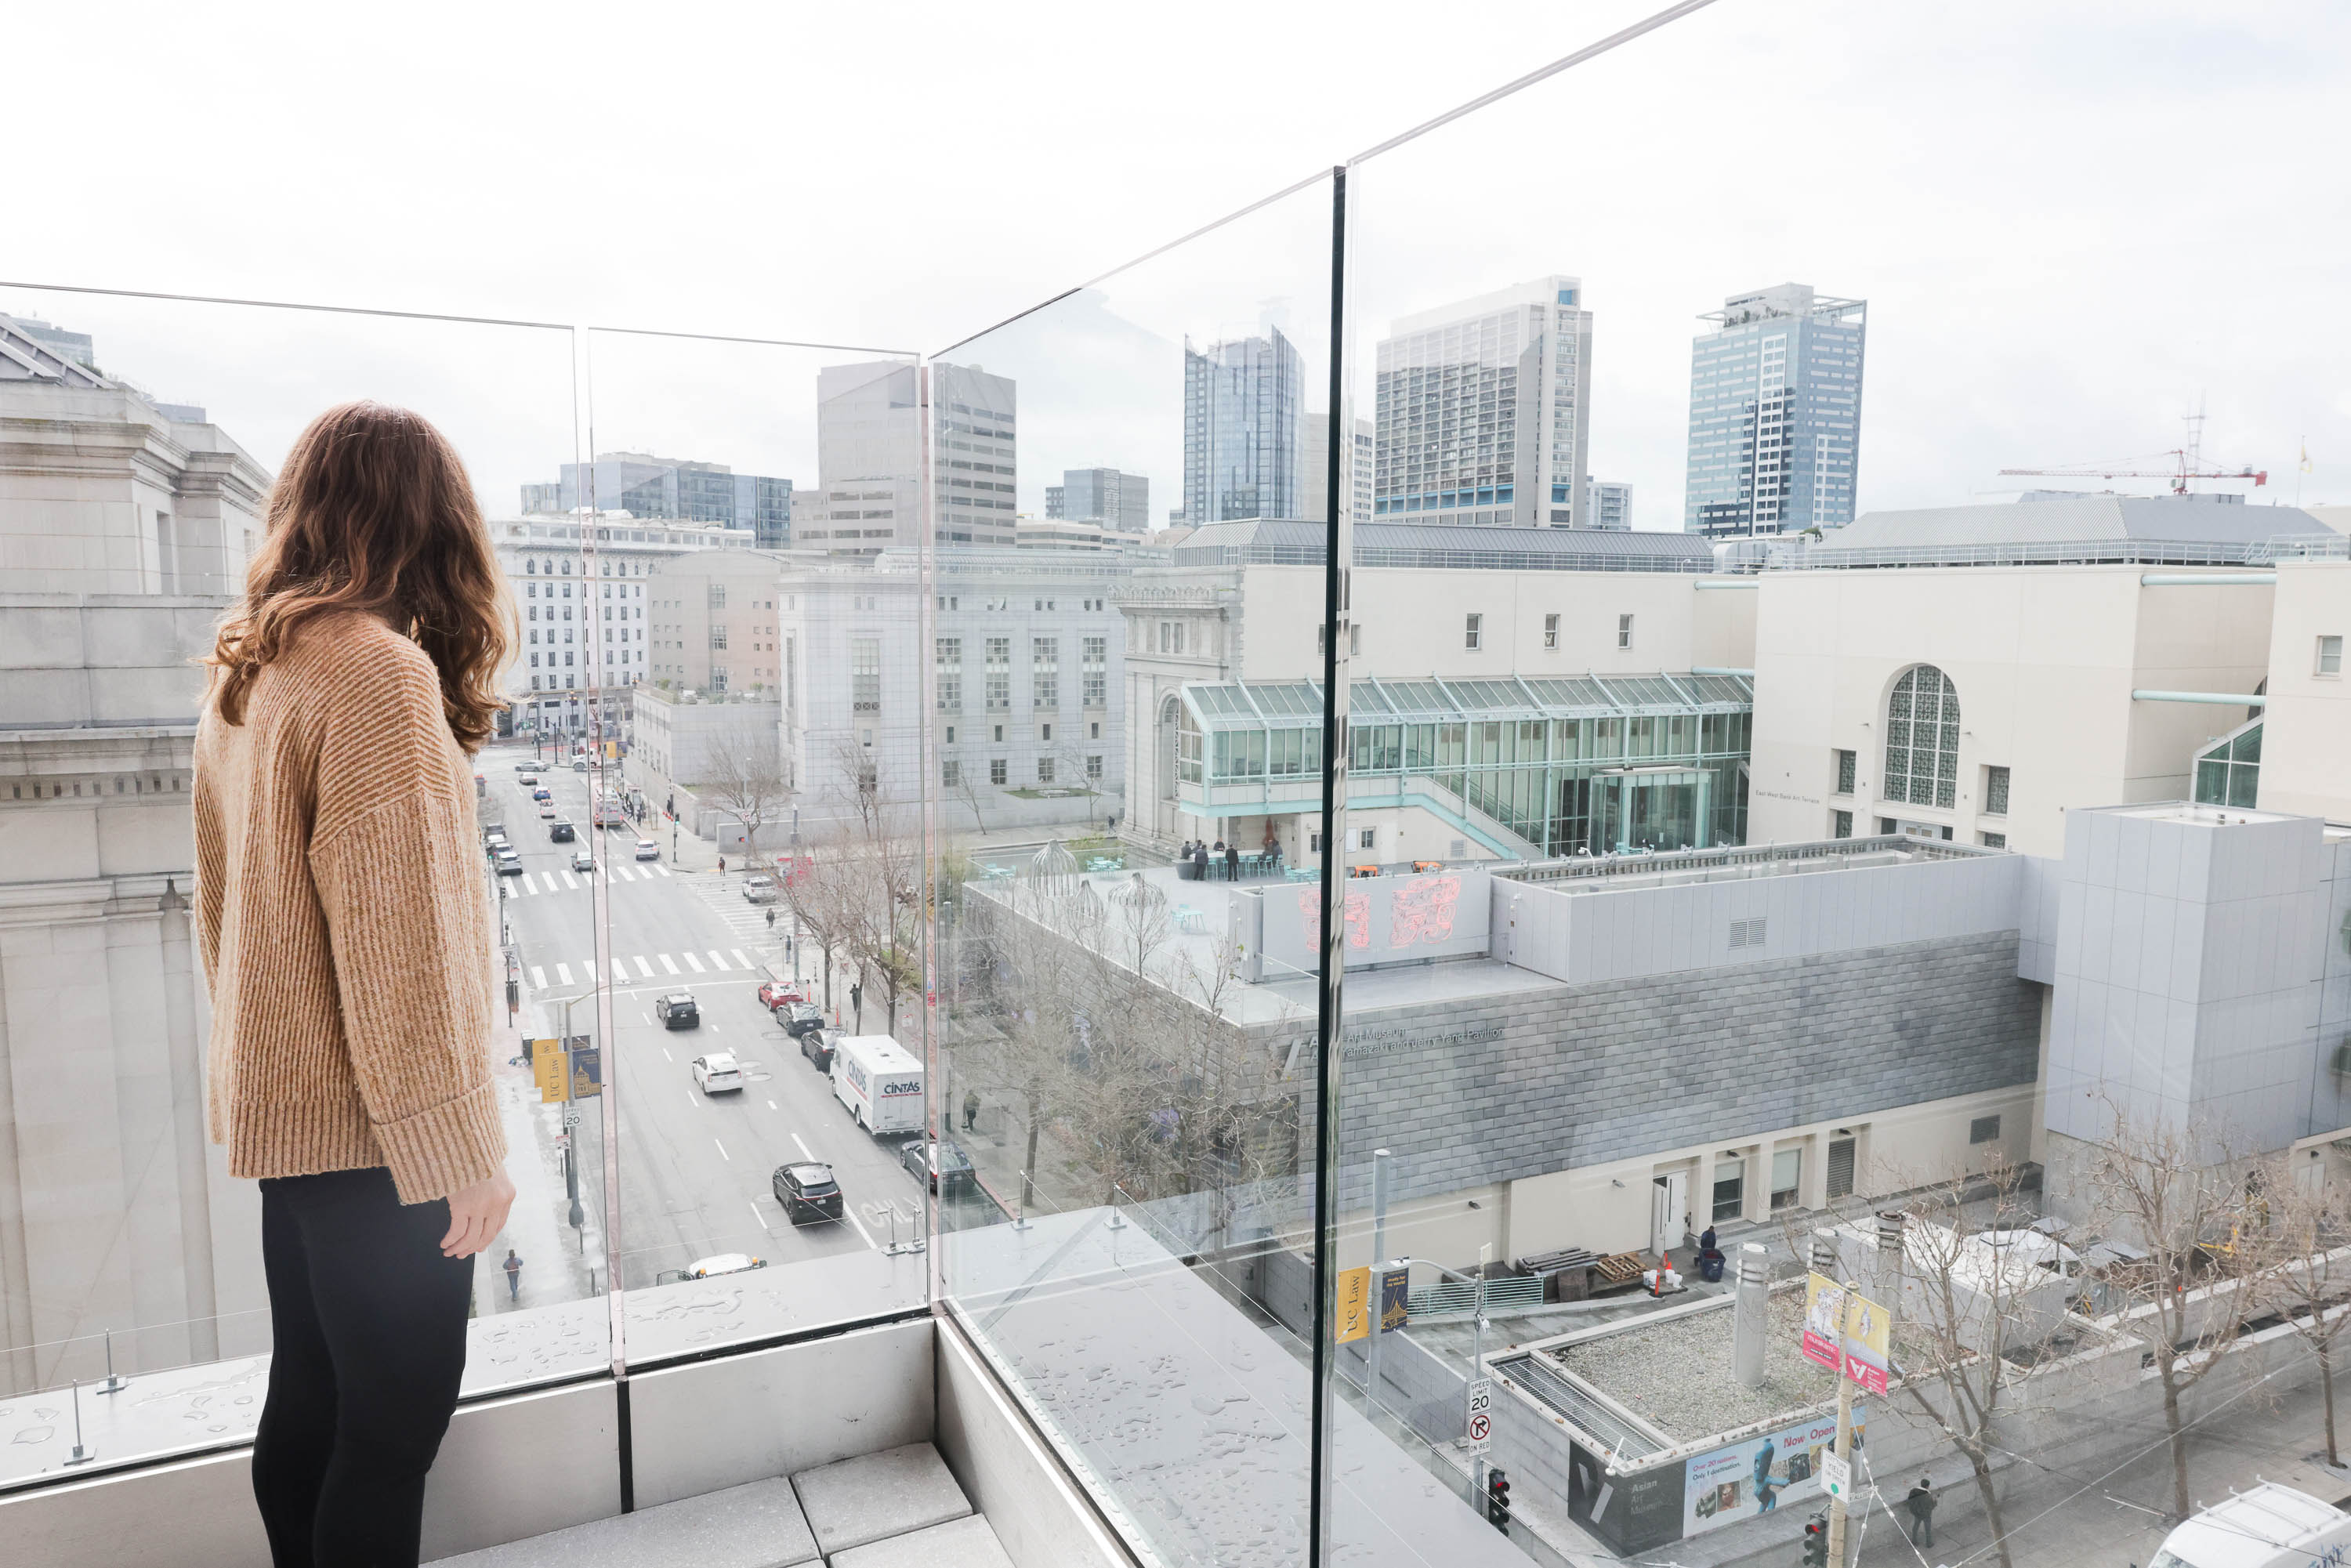 A woman views a cityscape with buildings and streets from a balcony with glass barriers.